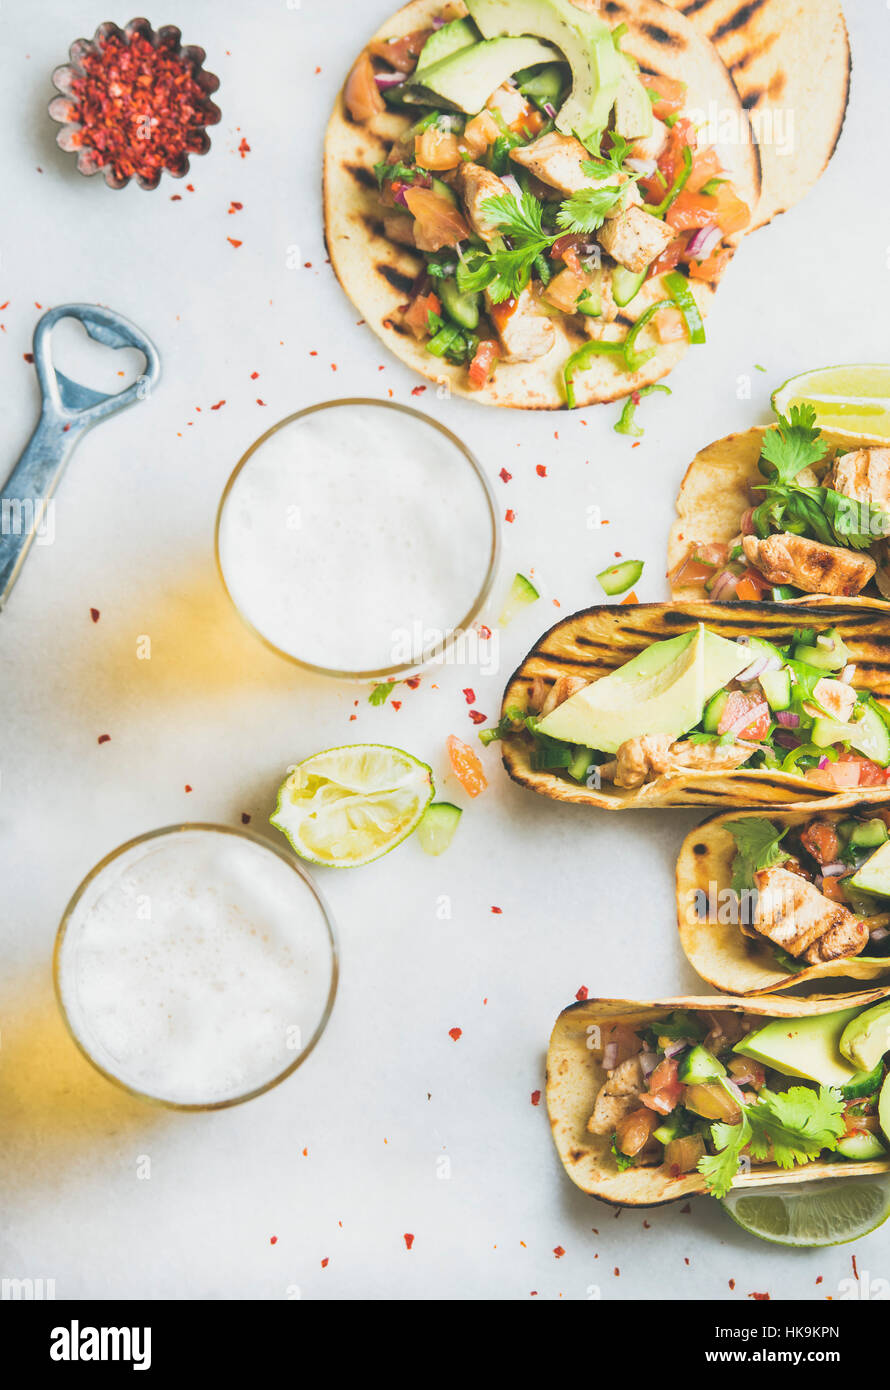 Healthy corn tortillas with grilled chicken, avocado, fresh salsa, limes, beer in glasses over light grey marble background, top view. Healthy food, g Stock Photo